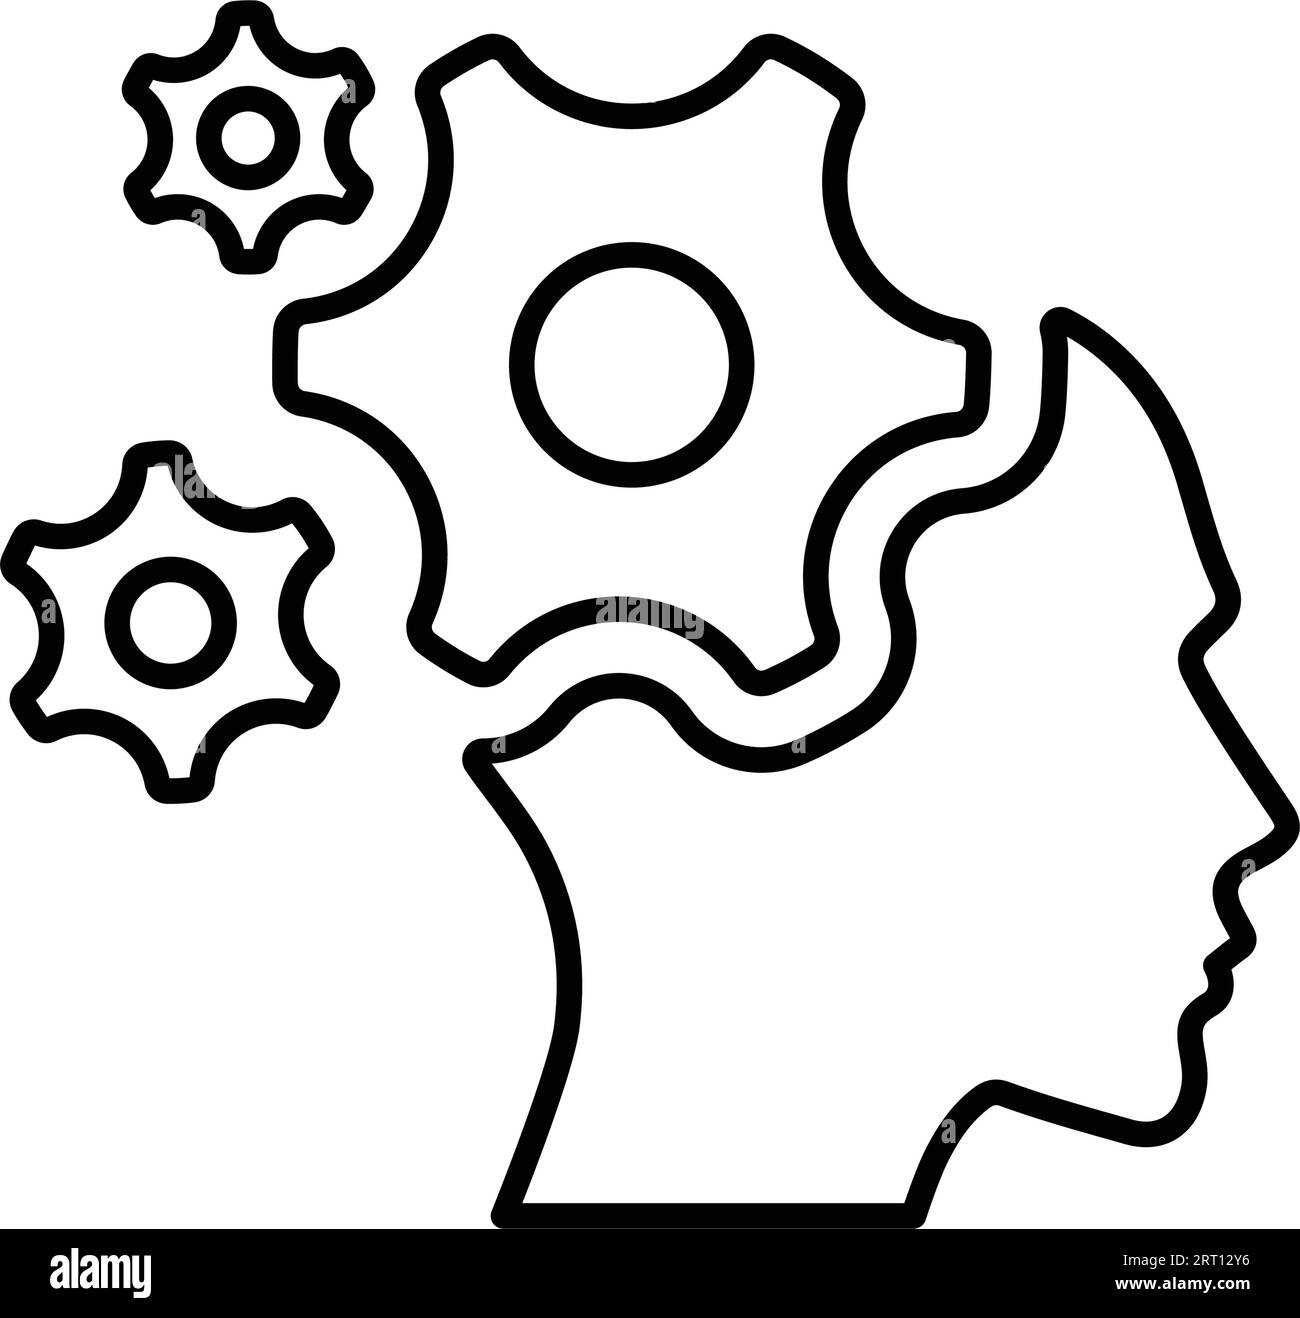 Mind System icon. Use for designing and developing websites, commercial purposes, print media, web or any type of design task. Stock Vector